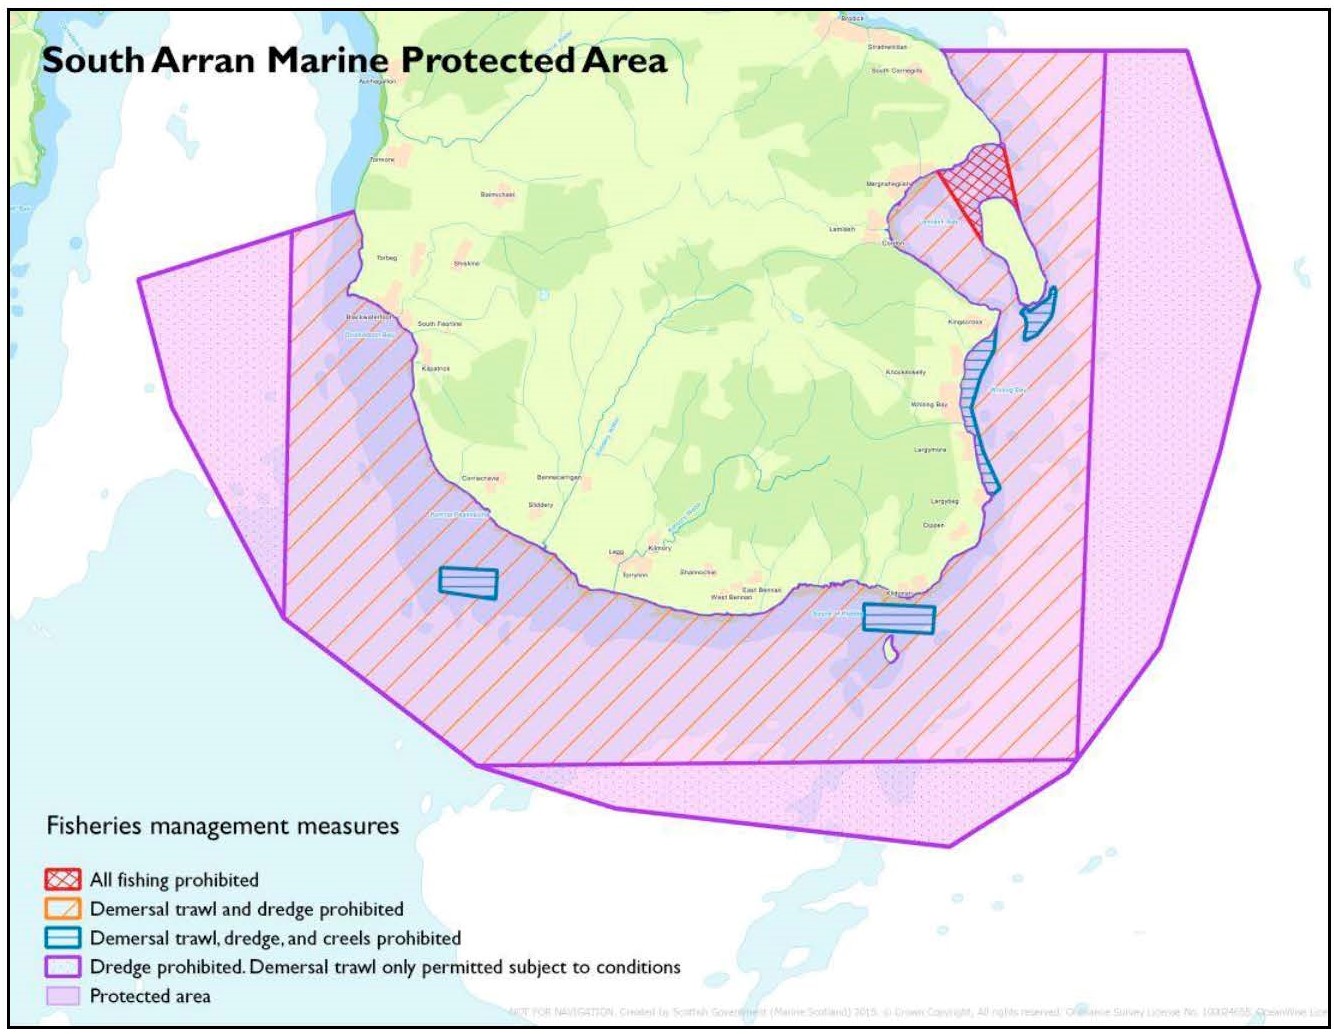 Map of South Arran Marine Protected Area, showing regions where all fishing is prohibited, demsersal trawl and dredging is prohibited, demersal, dredge and creels prohibited, dredge prohibited and demersal trawl only permitted subject to conditions.